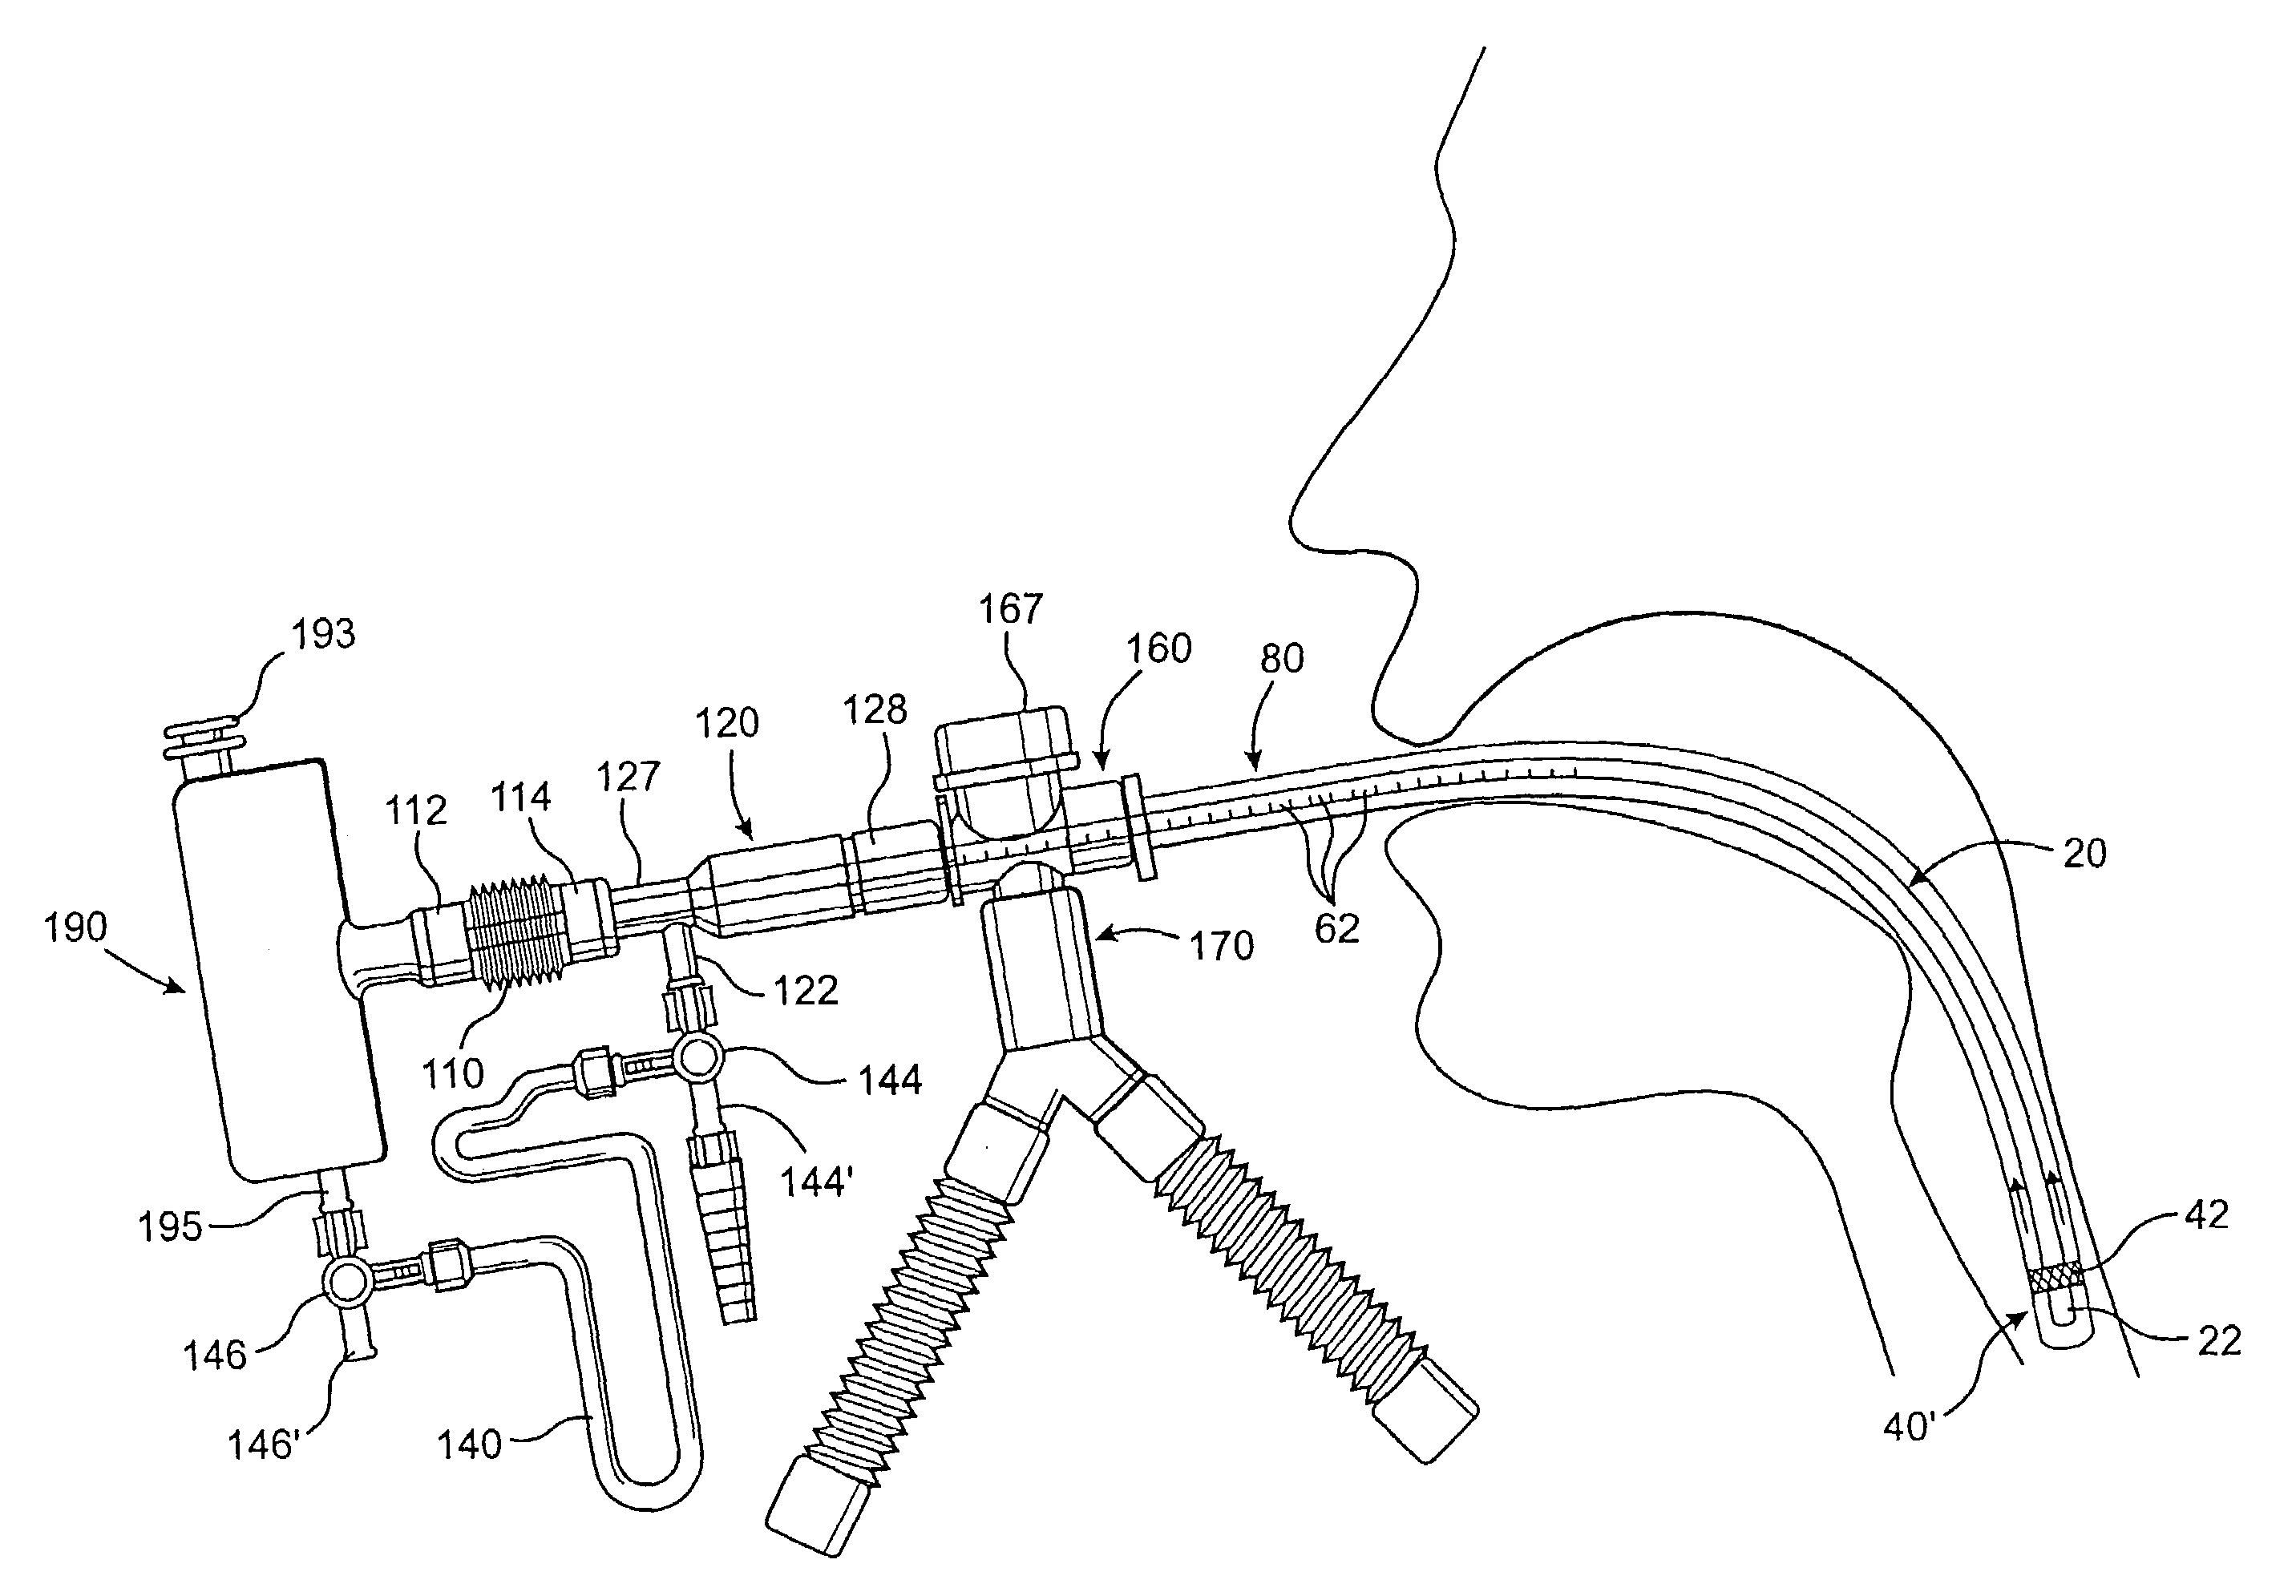 Endotracheal tube cleaning apparatus and method